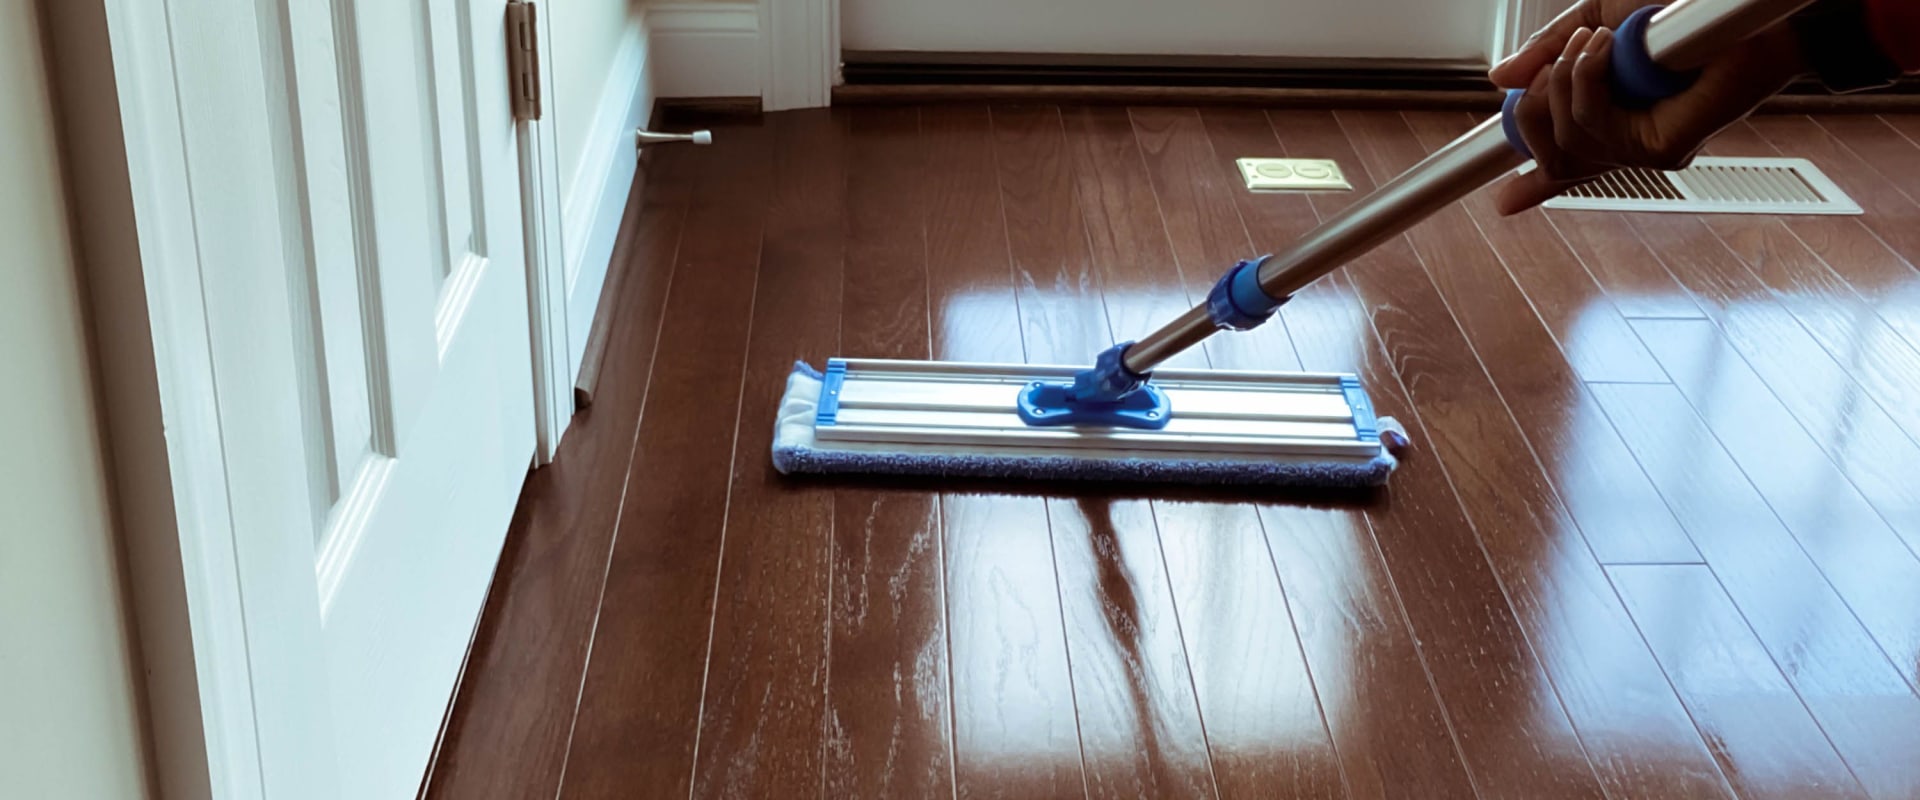 How to Clean and Maintain Wooden Flooring Like a Pro